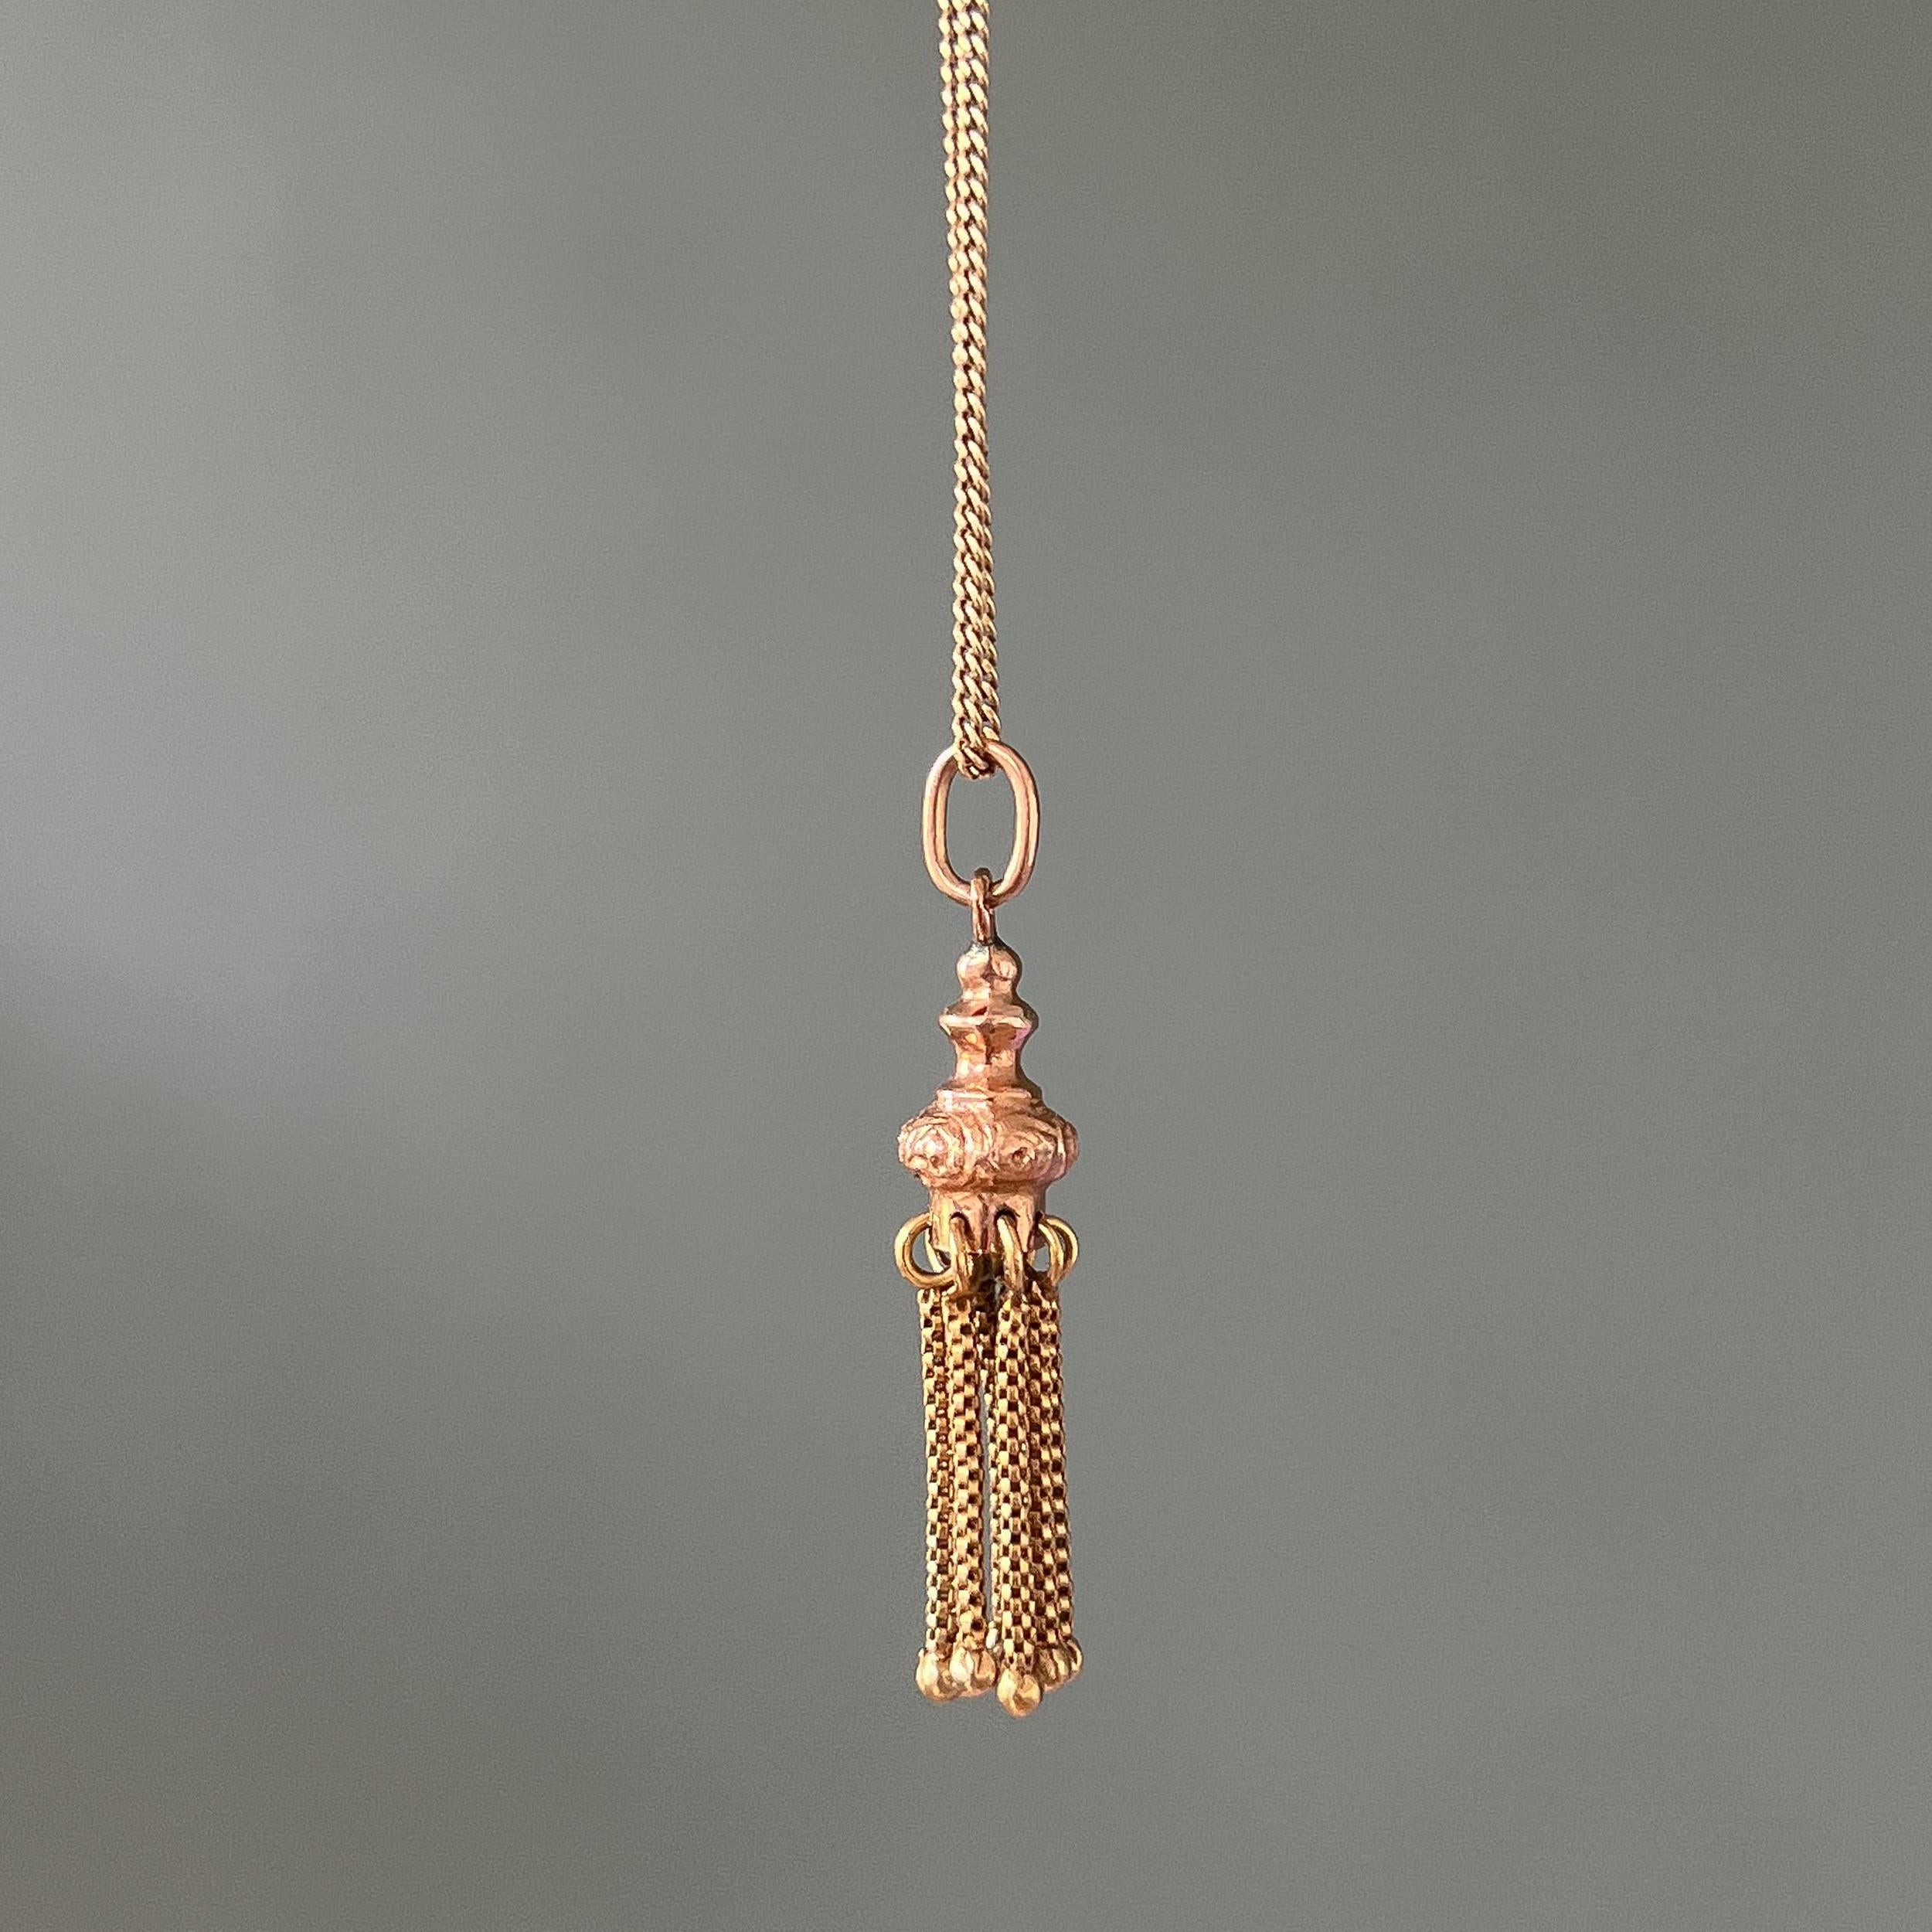 An antique Victorian 1890's tassel charm pendant made in 14 karat yellow gold. On top, the pendant is detailed with an Arabic dome decor and the eight Venetian tassel chains below are each hung on gold rings. The end caps of the tassels are set with